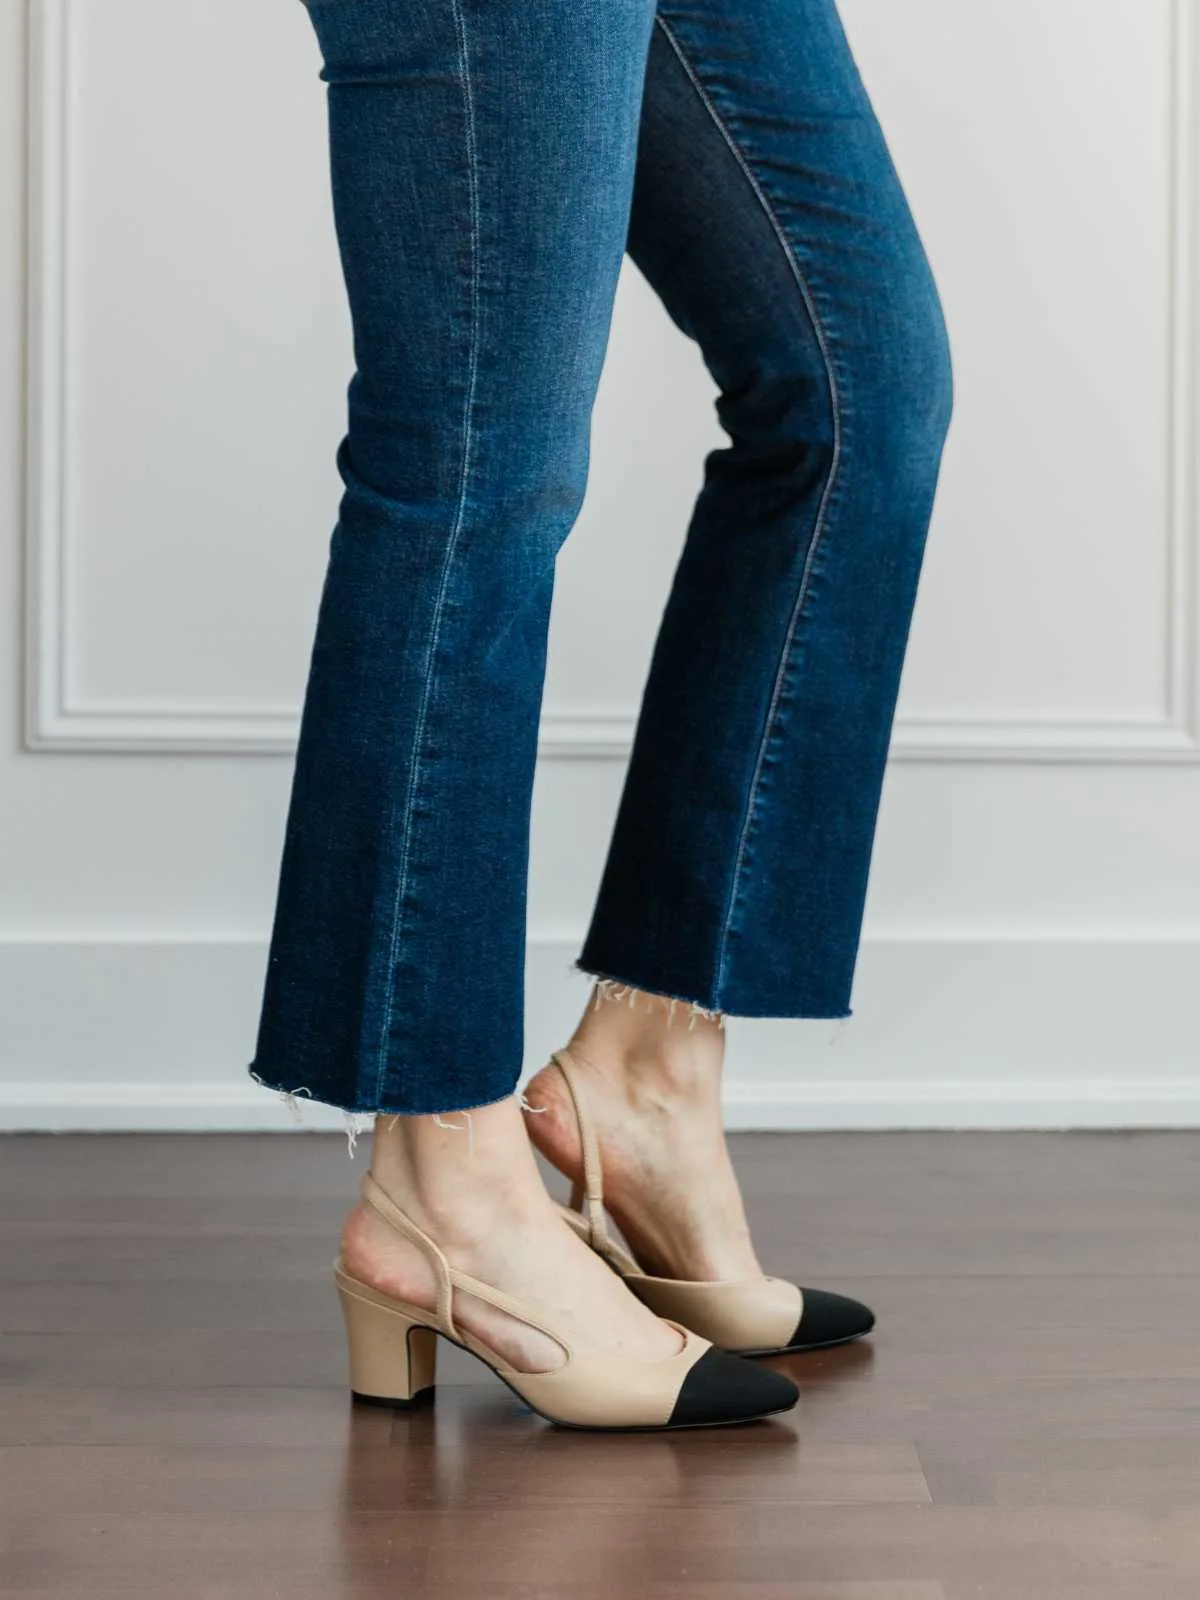 Cropped view of woman's legs wearing   slingback pumps with kick flares